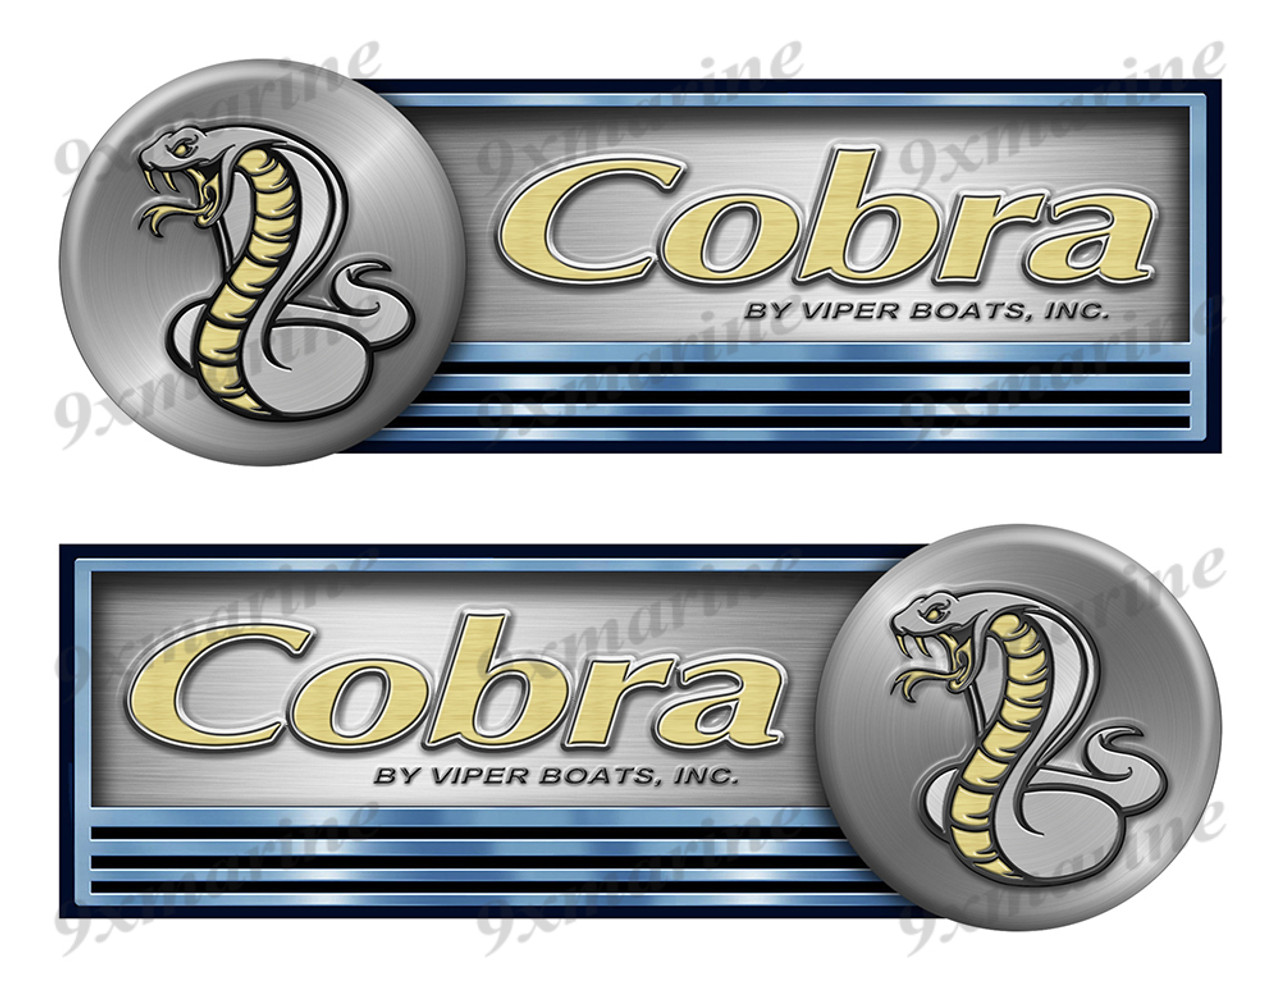 Two Cobra Stickers for Boat Restoration - 10" long each